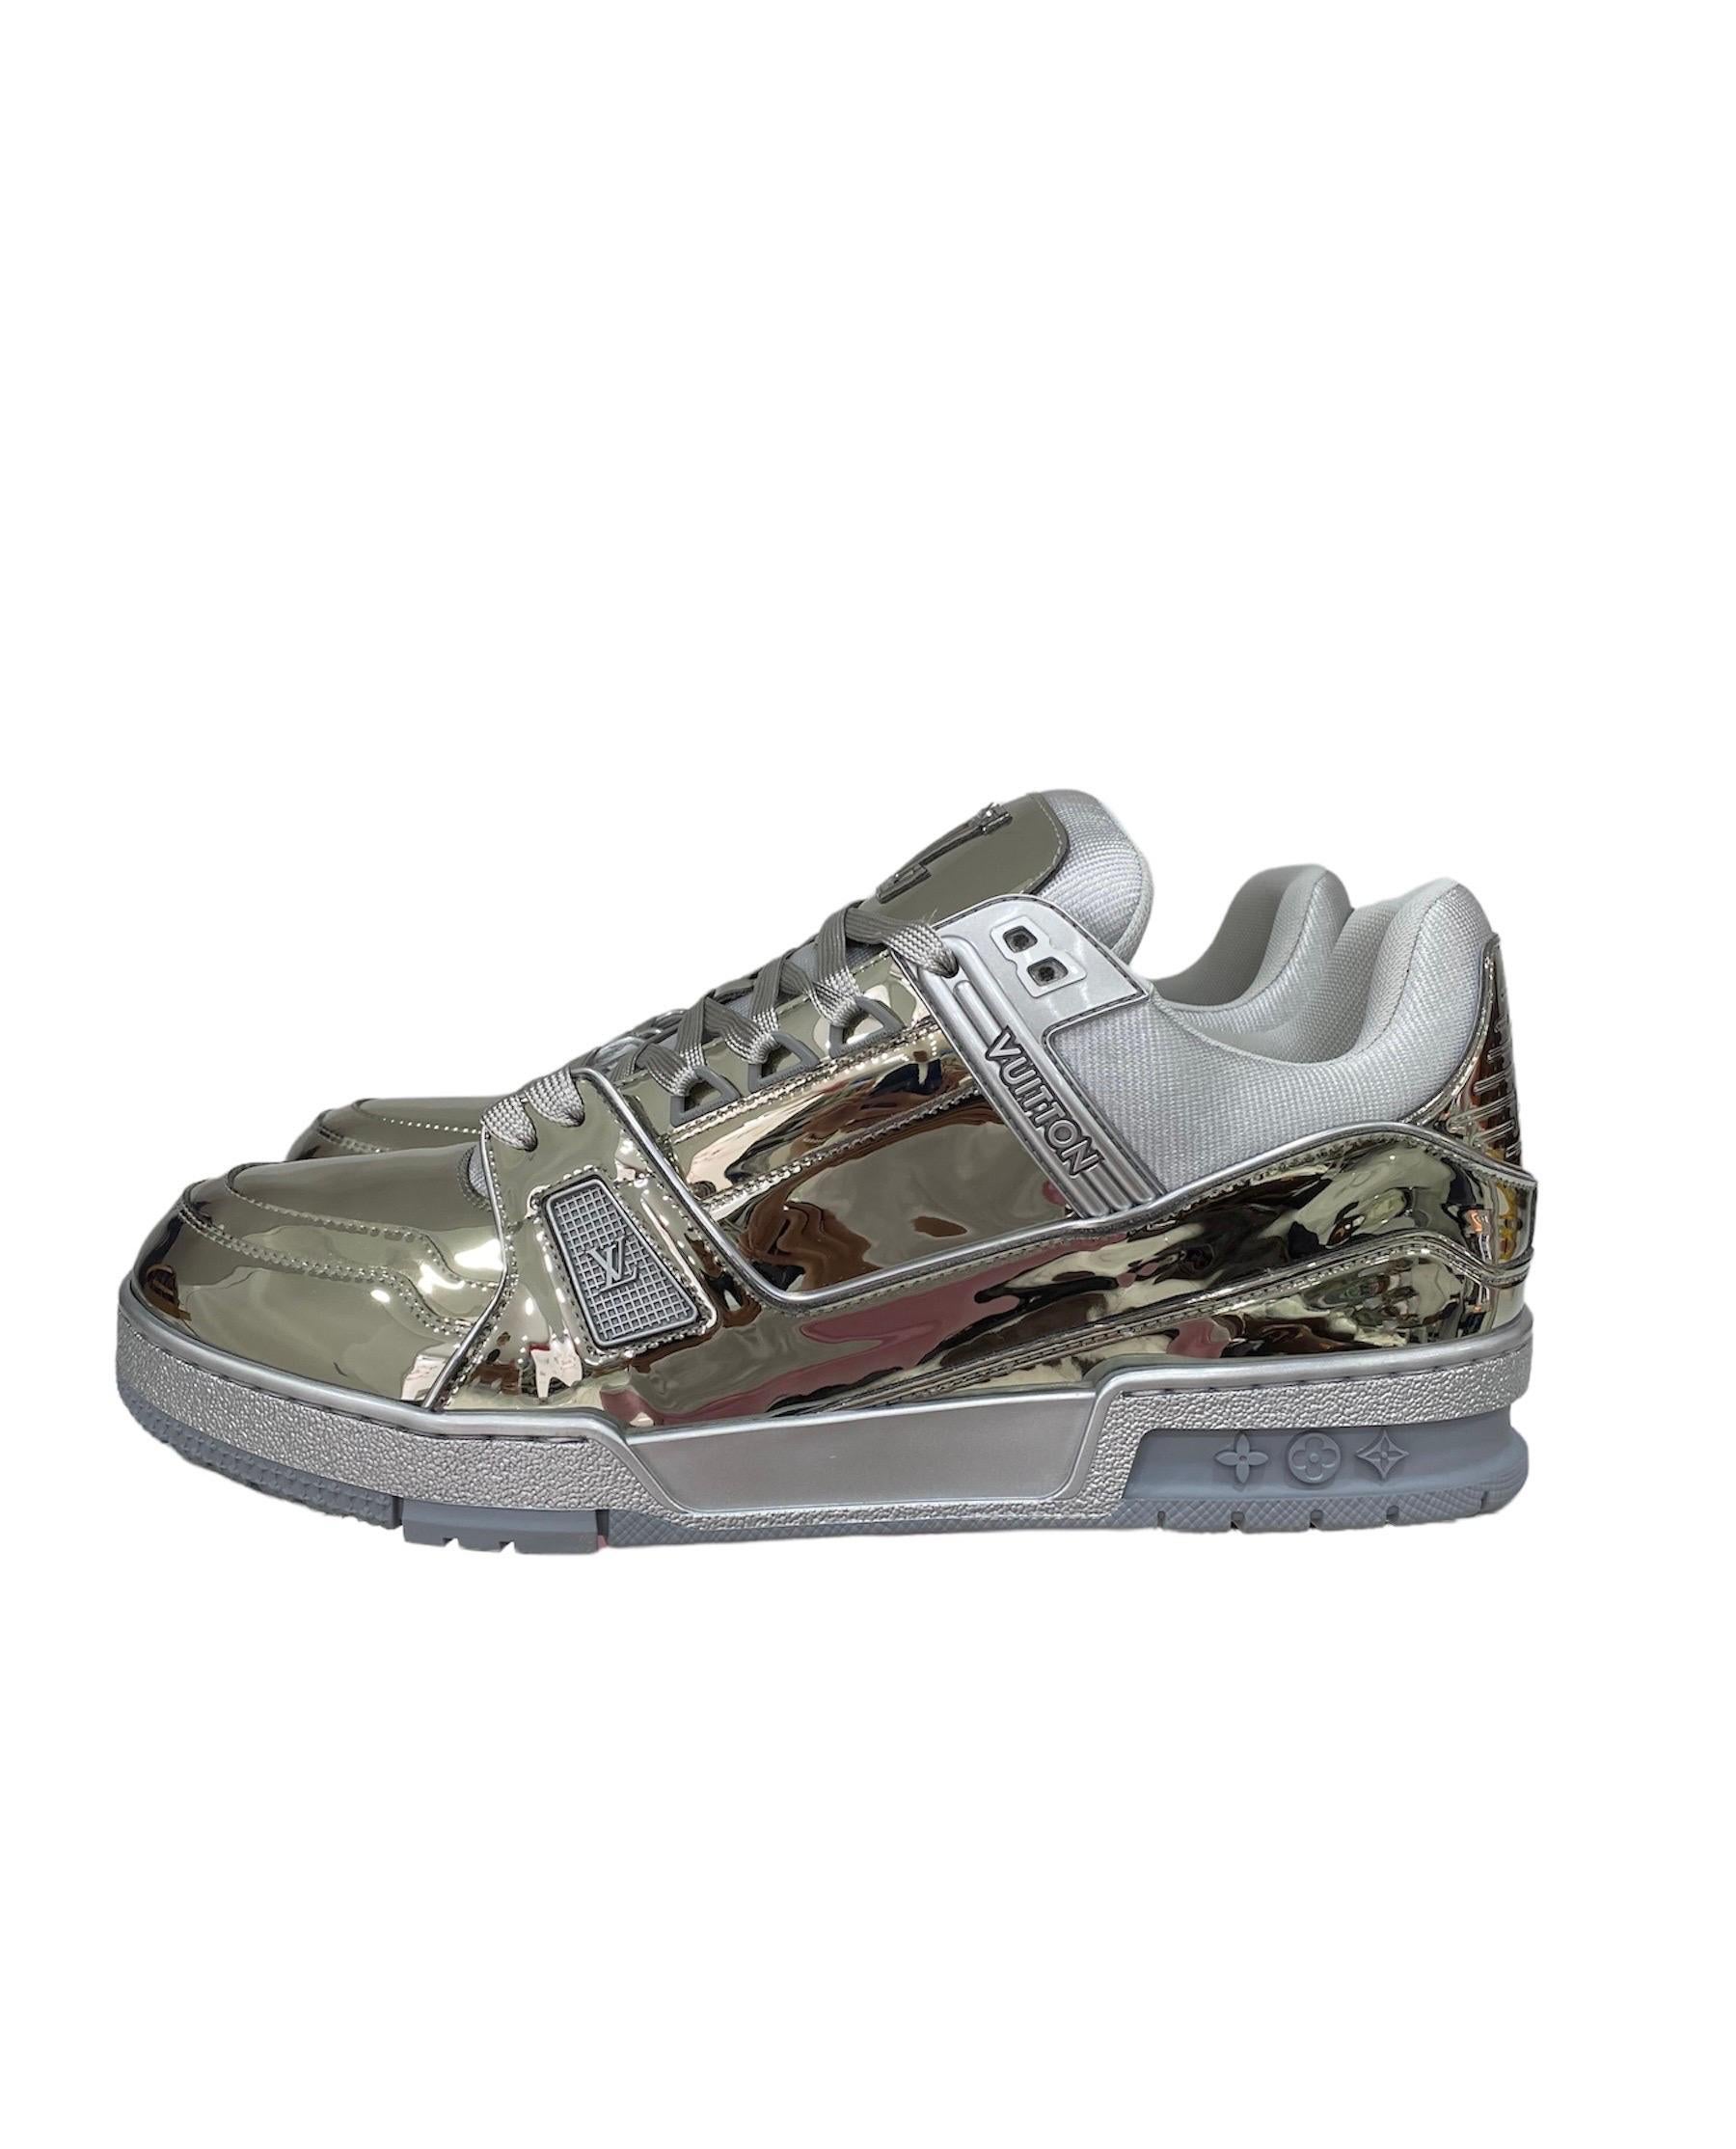 Louis Vuitton Sneakers Trainer Silver Mirror  1